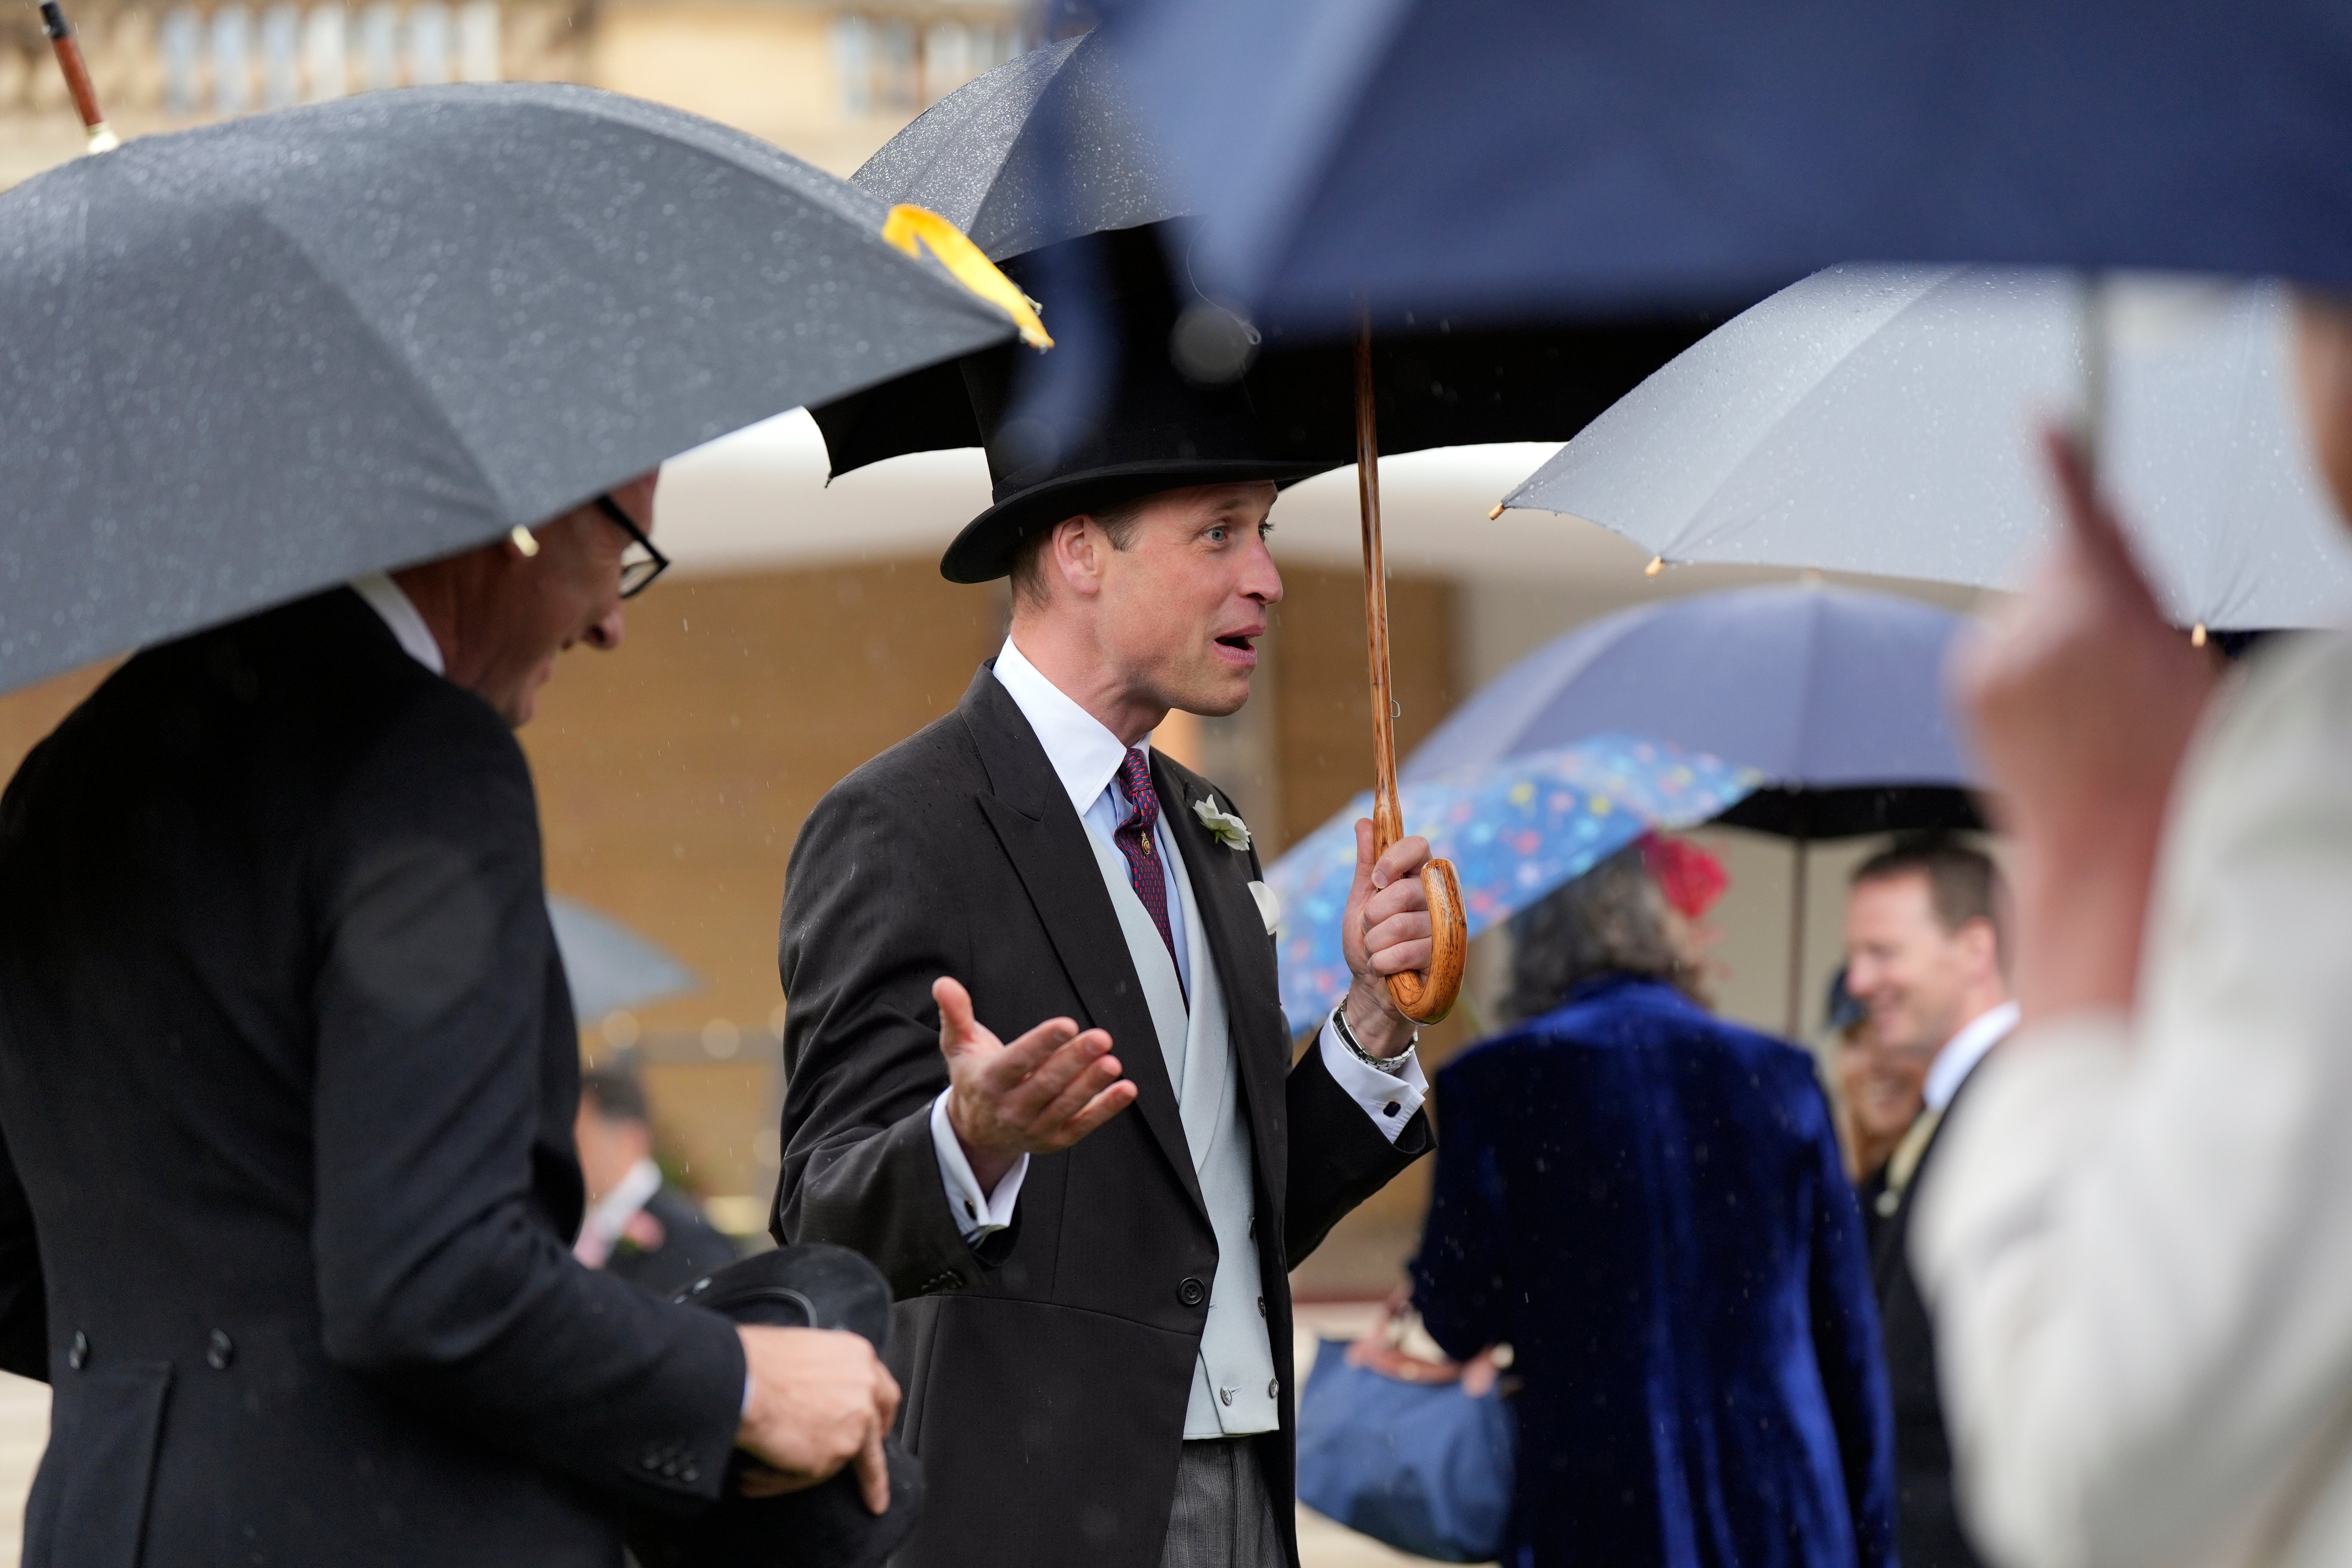 Prince William revealed that Prince George has an interest in the military yesterday